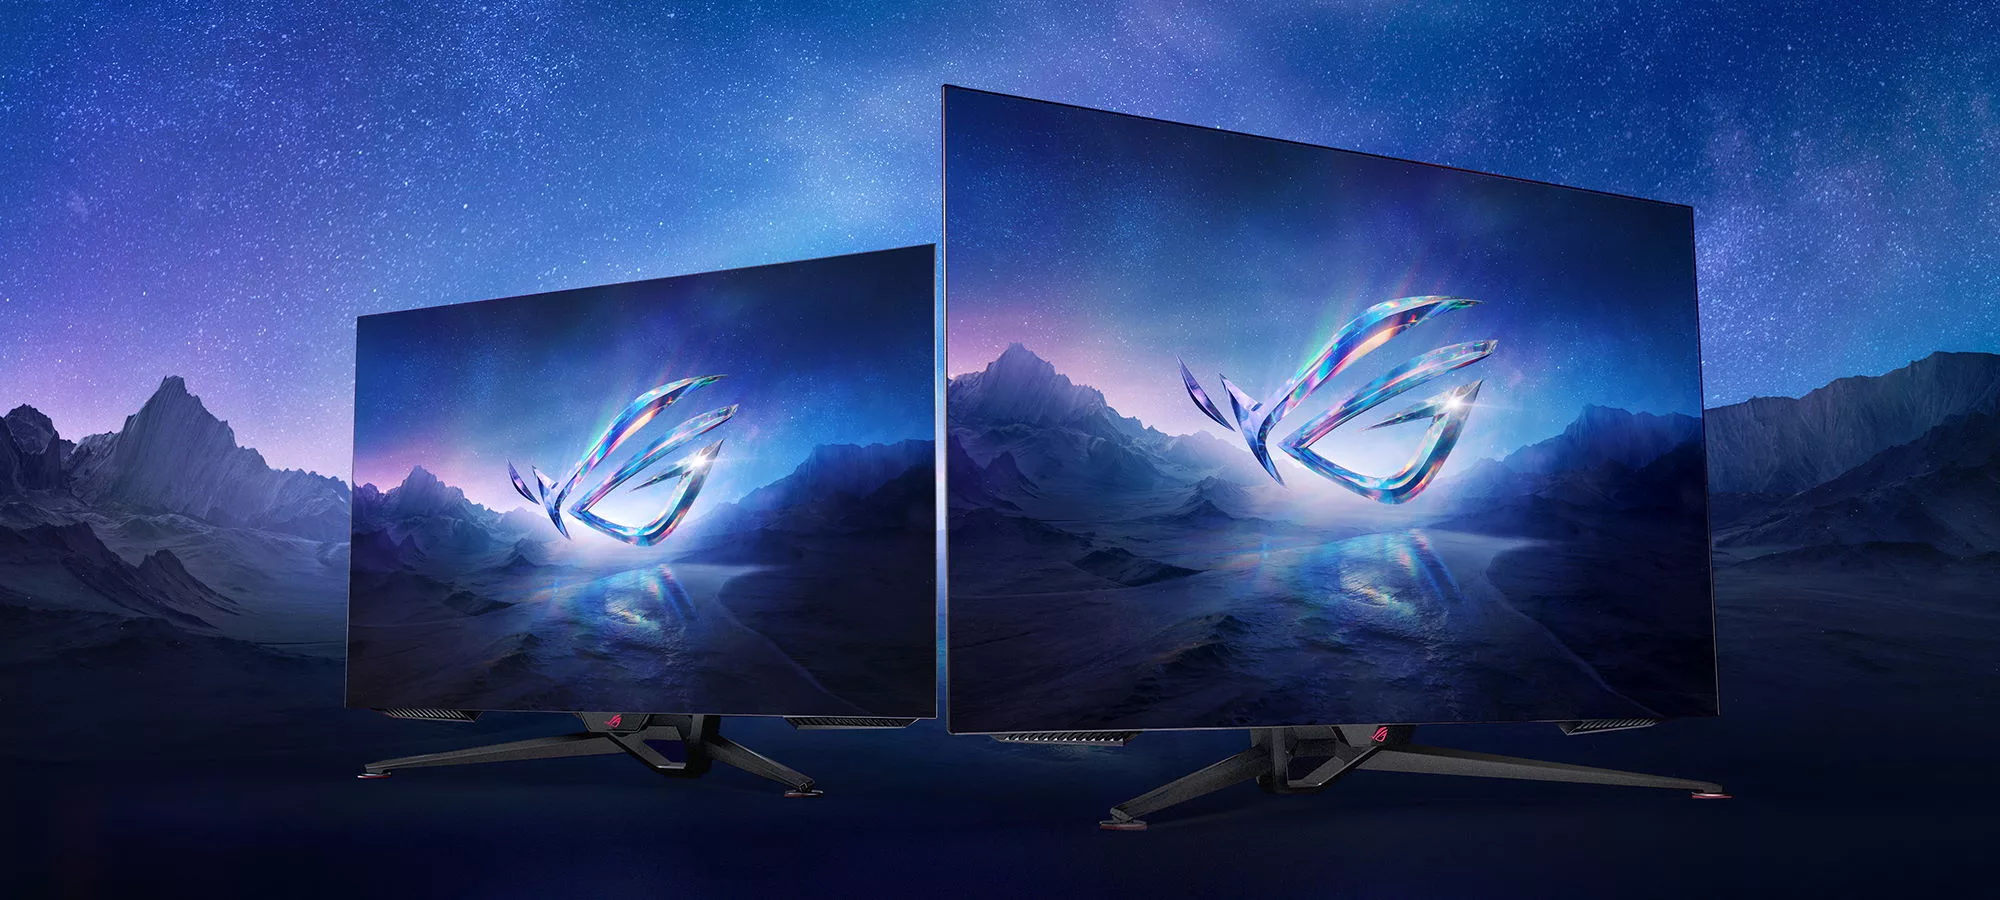 Render of two ROG monitors, featuring the ROG eye logo and with a starry night sky background.